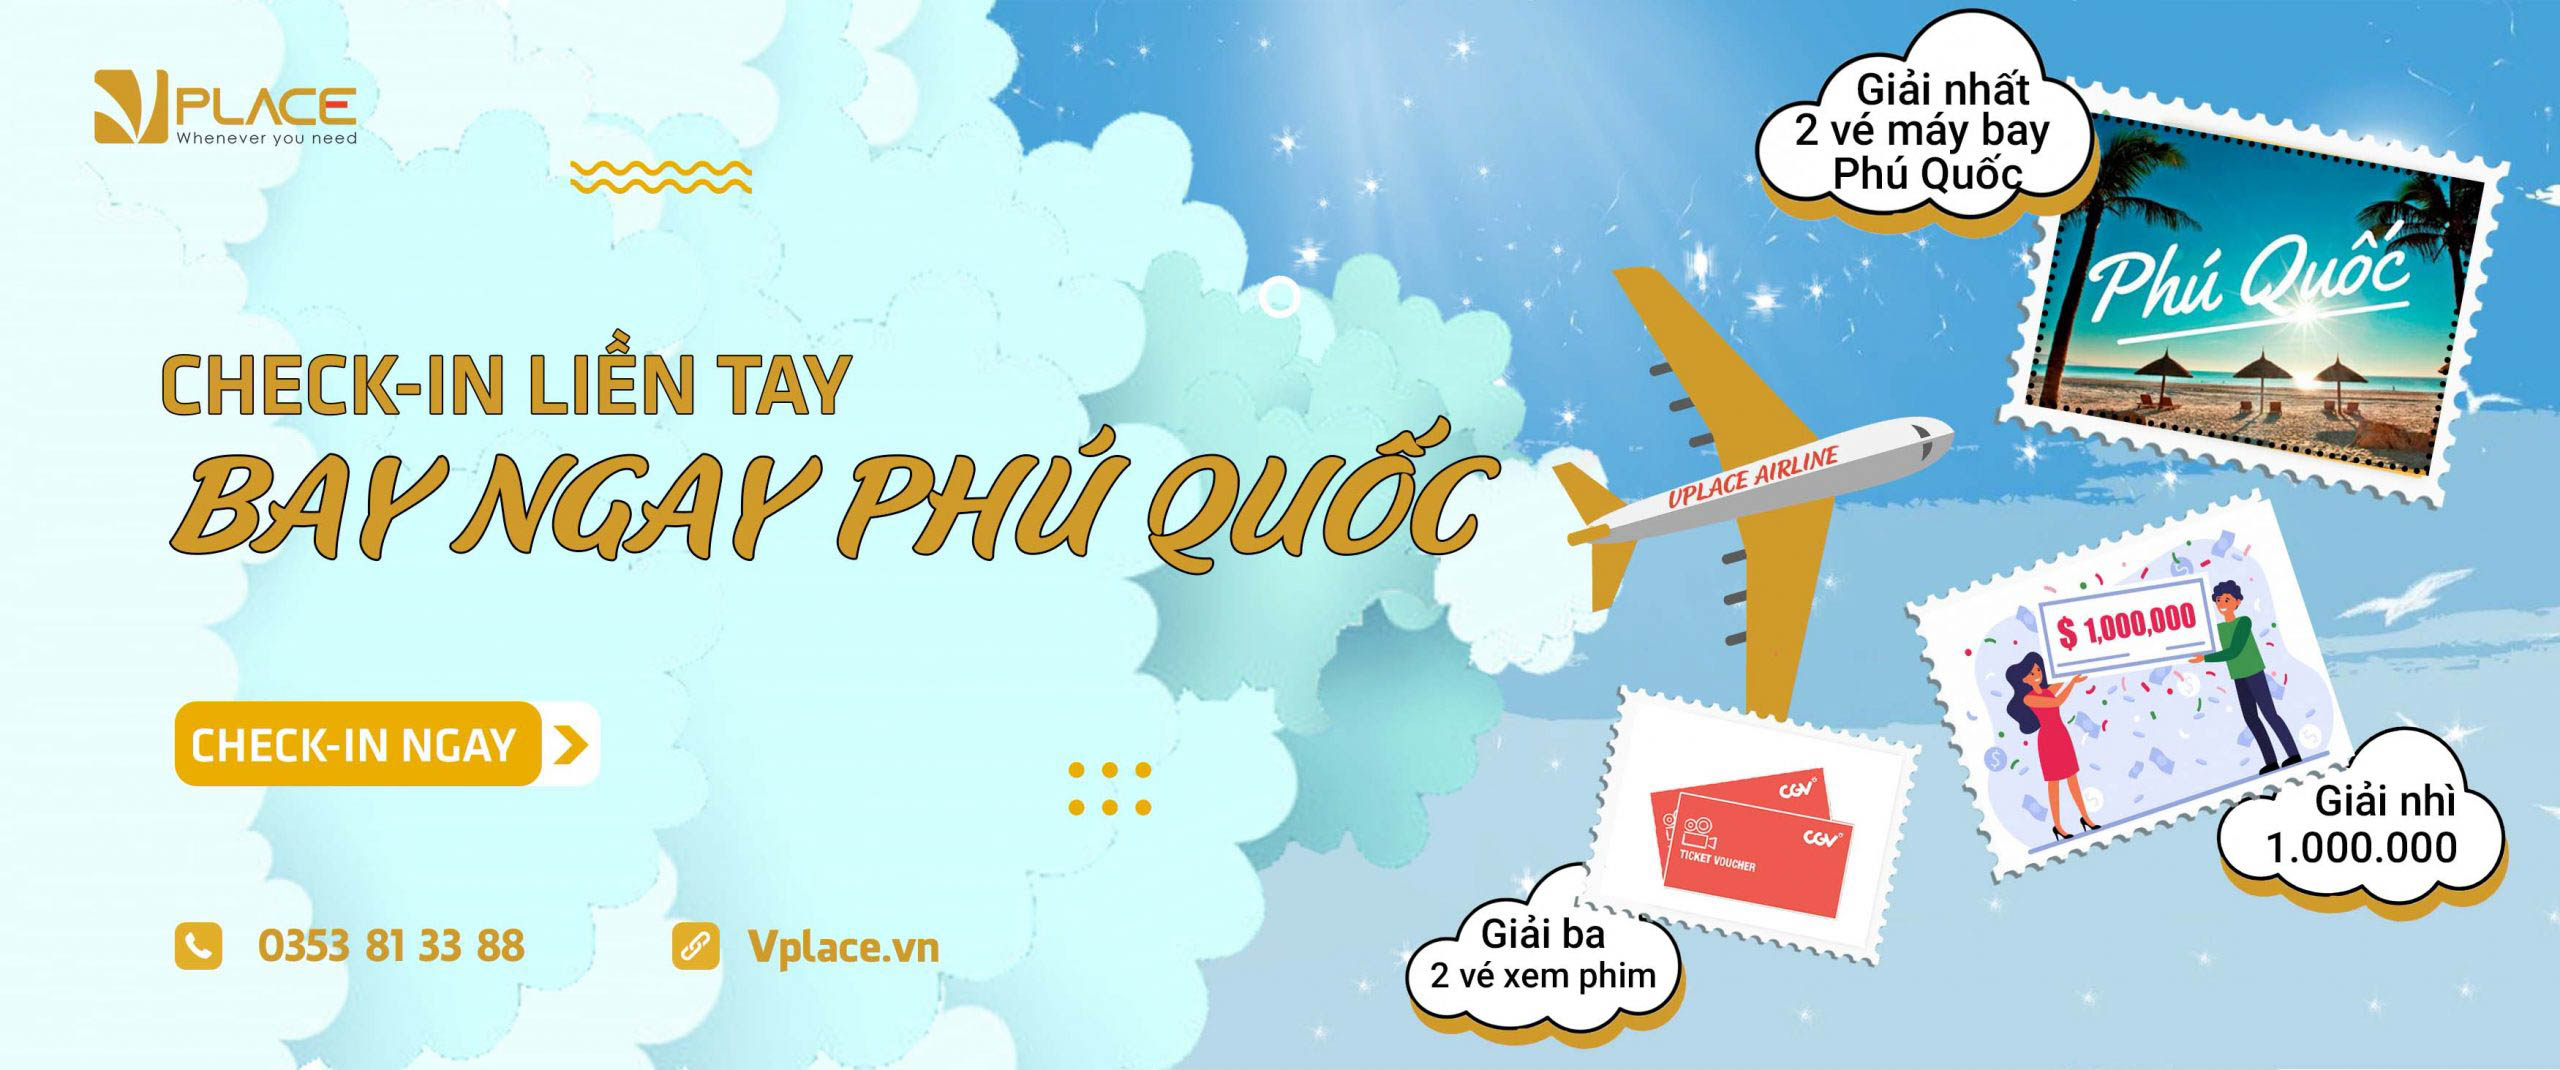 check in lien tay bay ngay phu quoc VPLACE scaled